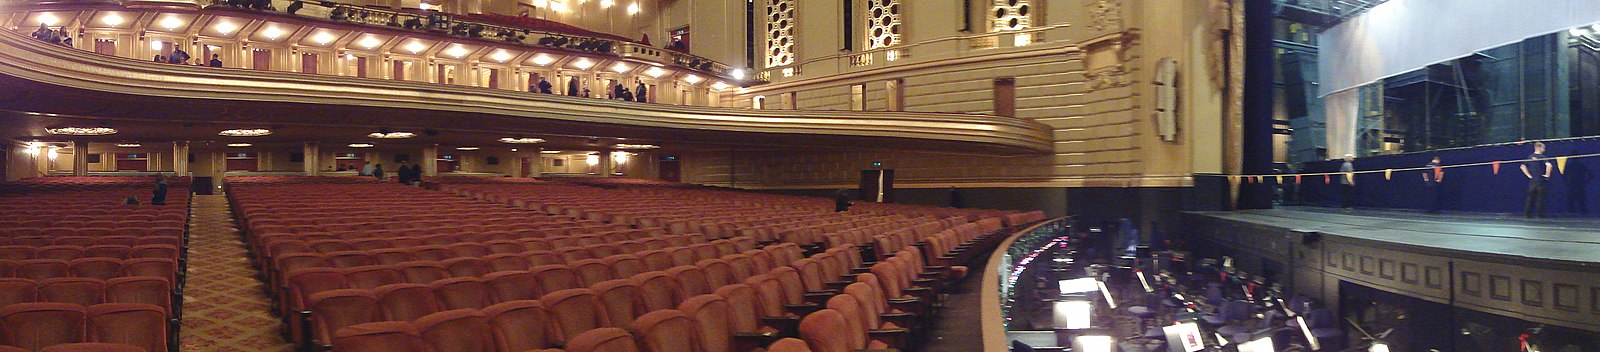 The San Francisco War Memorial Opera House is seen during a rehearsal.